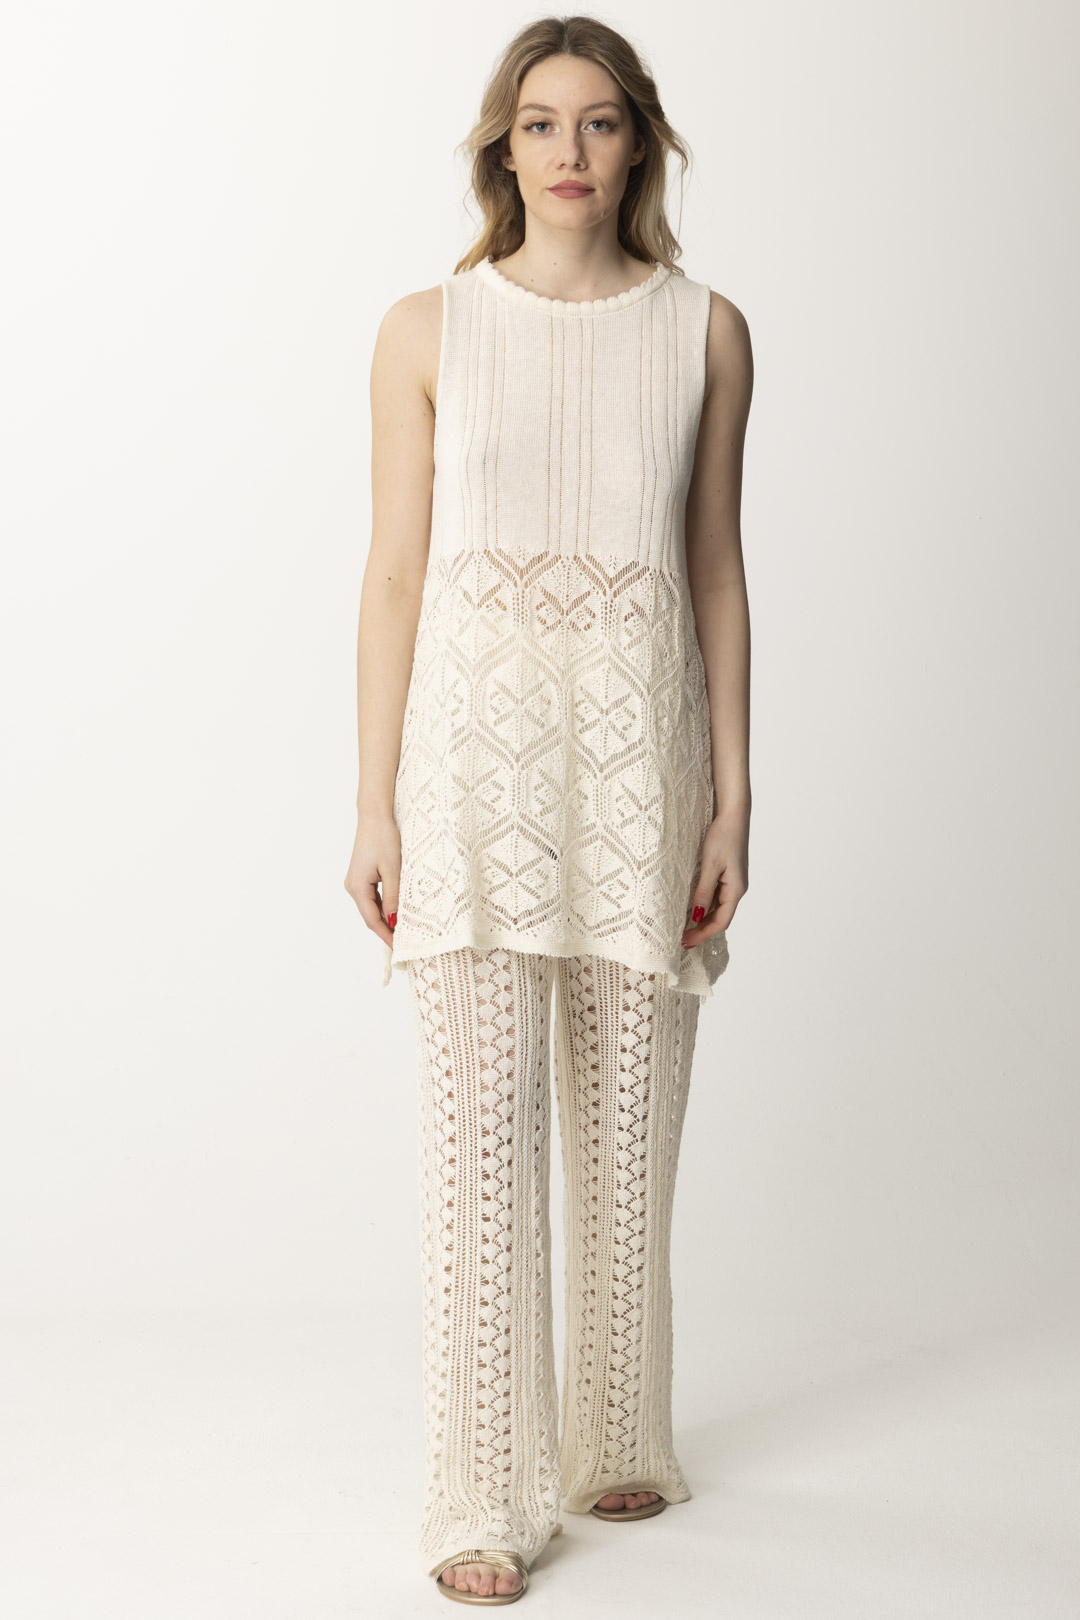 Preview: AKEP Linen Knit Perforated Palazzo Pants Panna